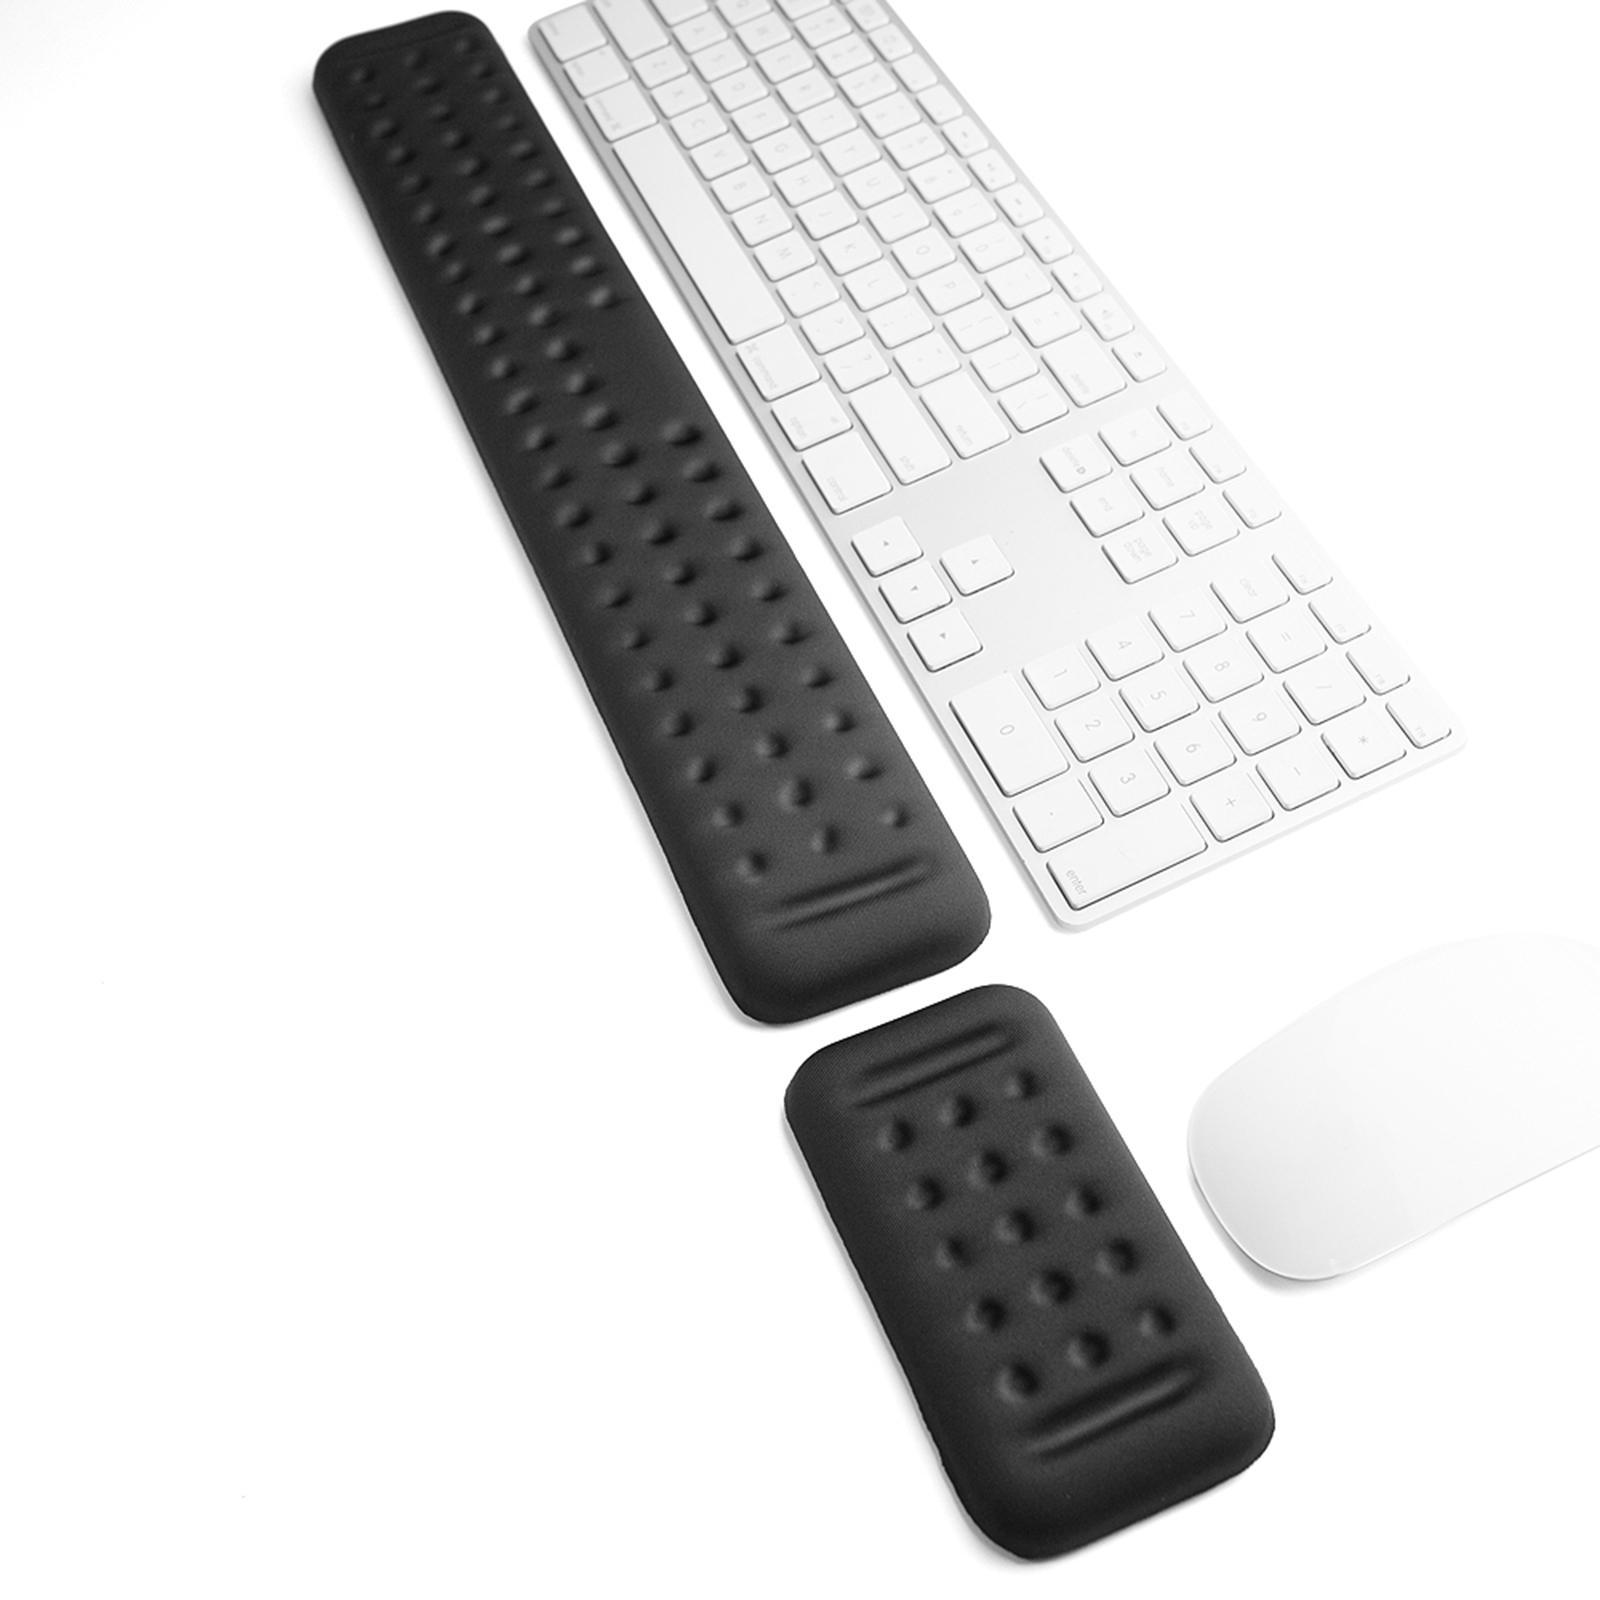 Keyboard Rest Pad Mouse Rest Support for Computer Office Durable S